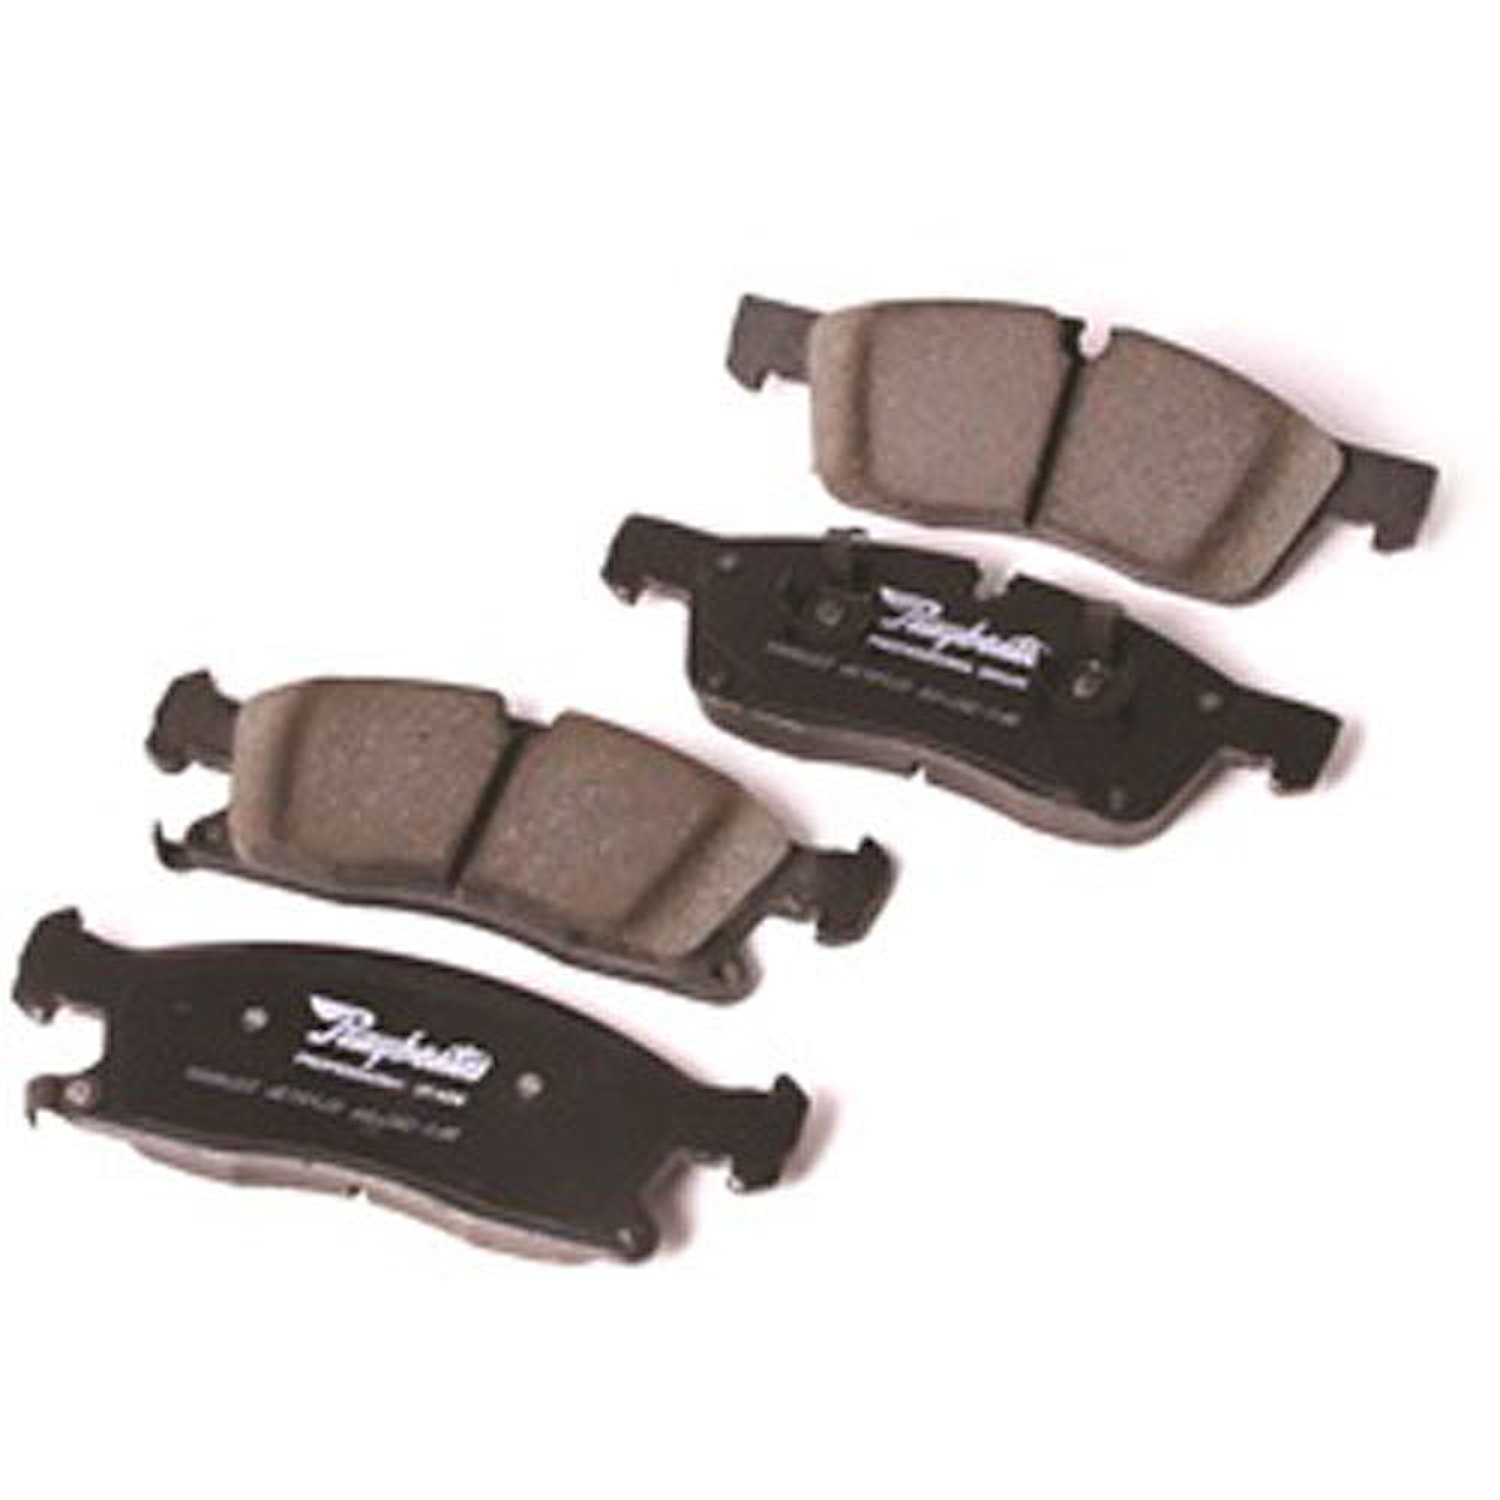 This pair of front brake pads from Omix-ADA fits 11-14 Jeep Grand Cherokees.